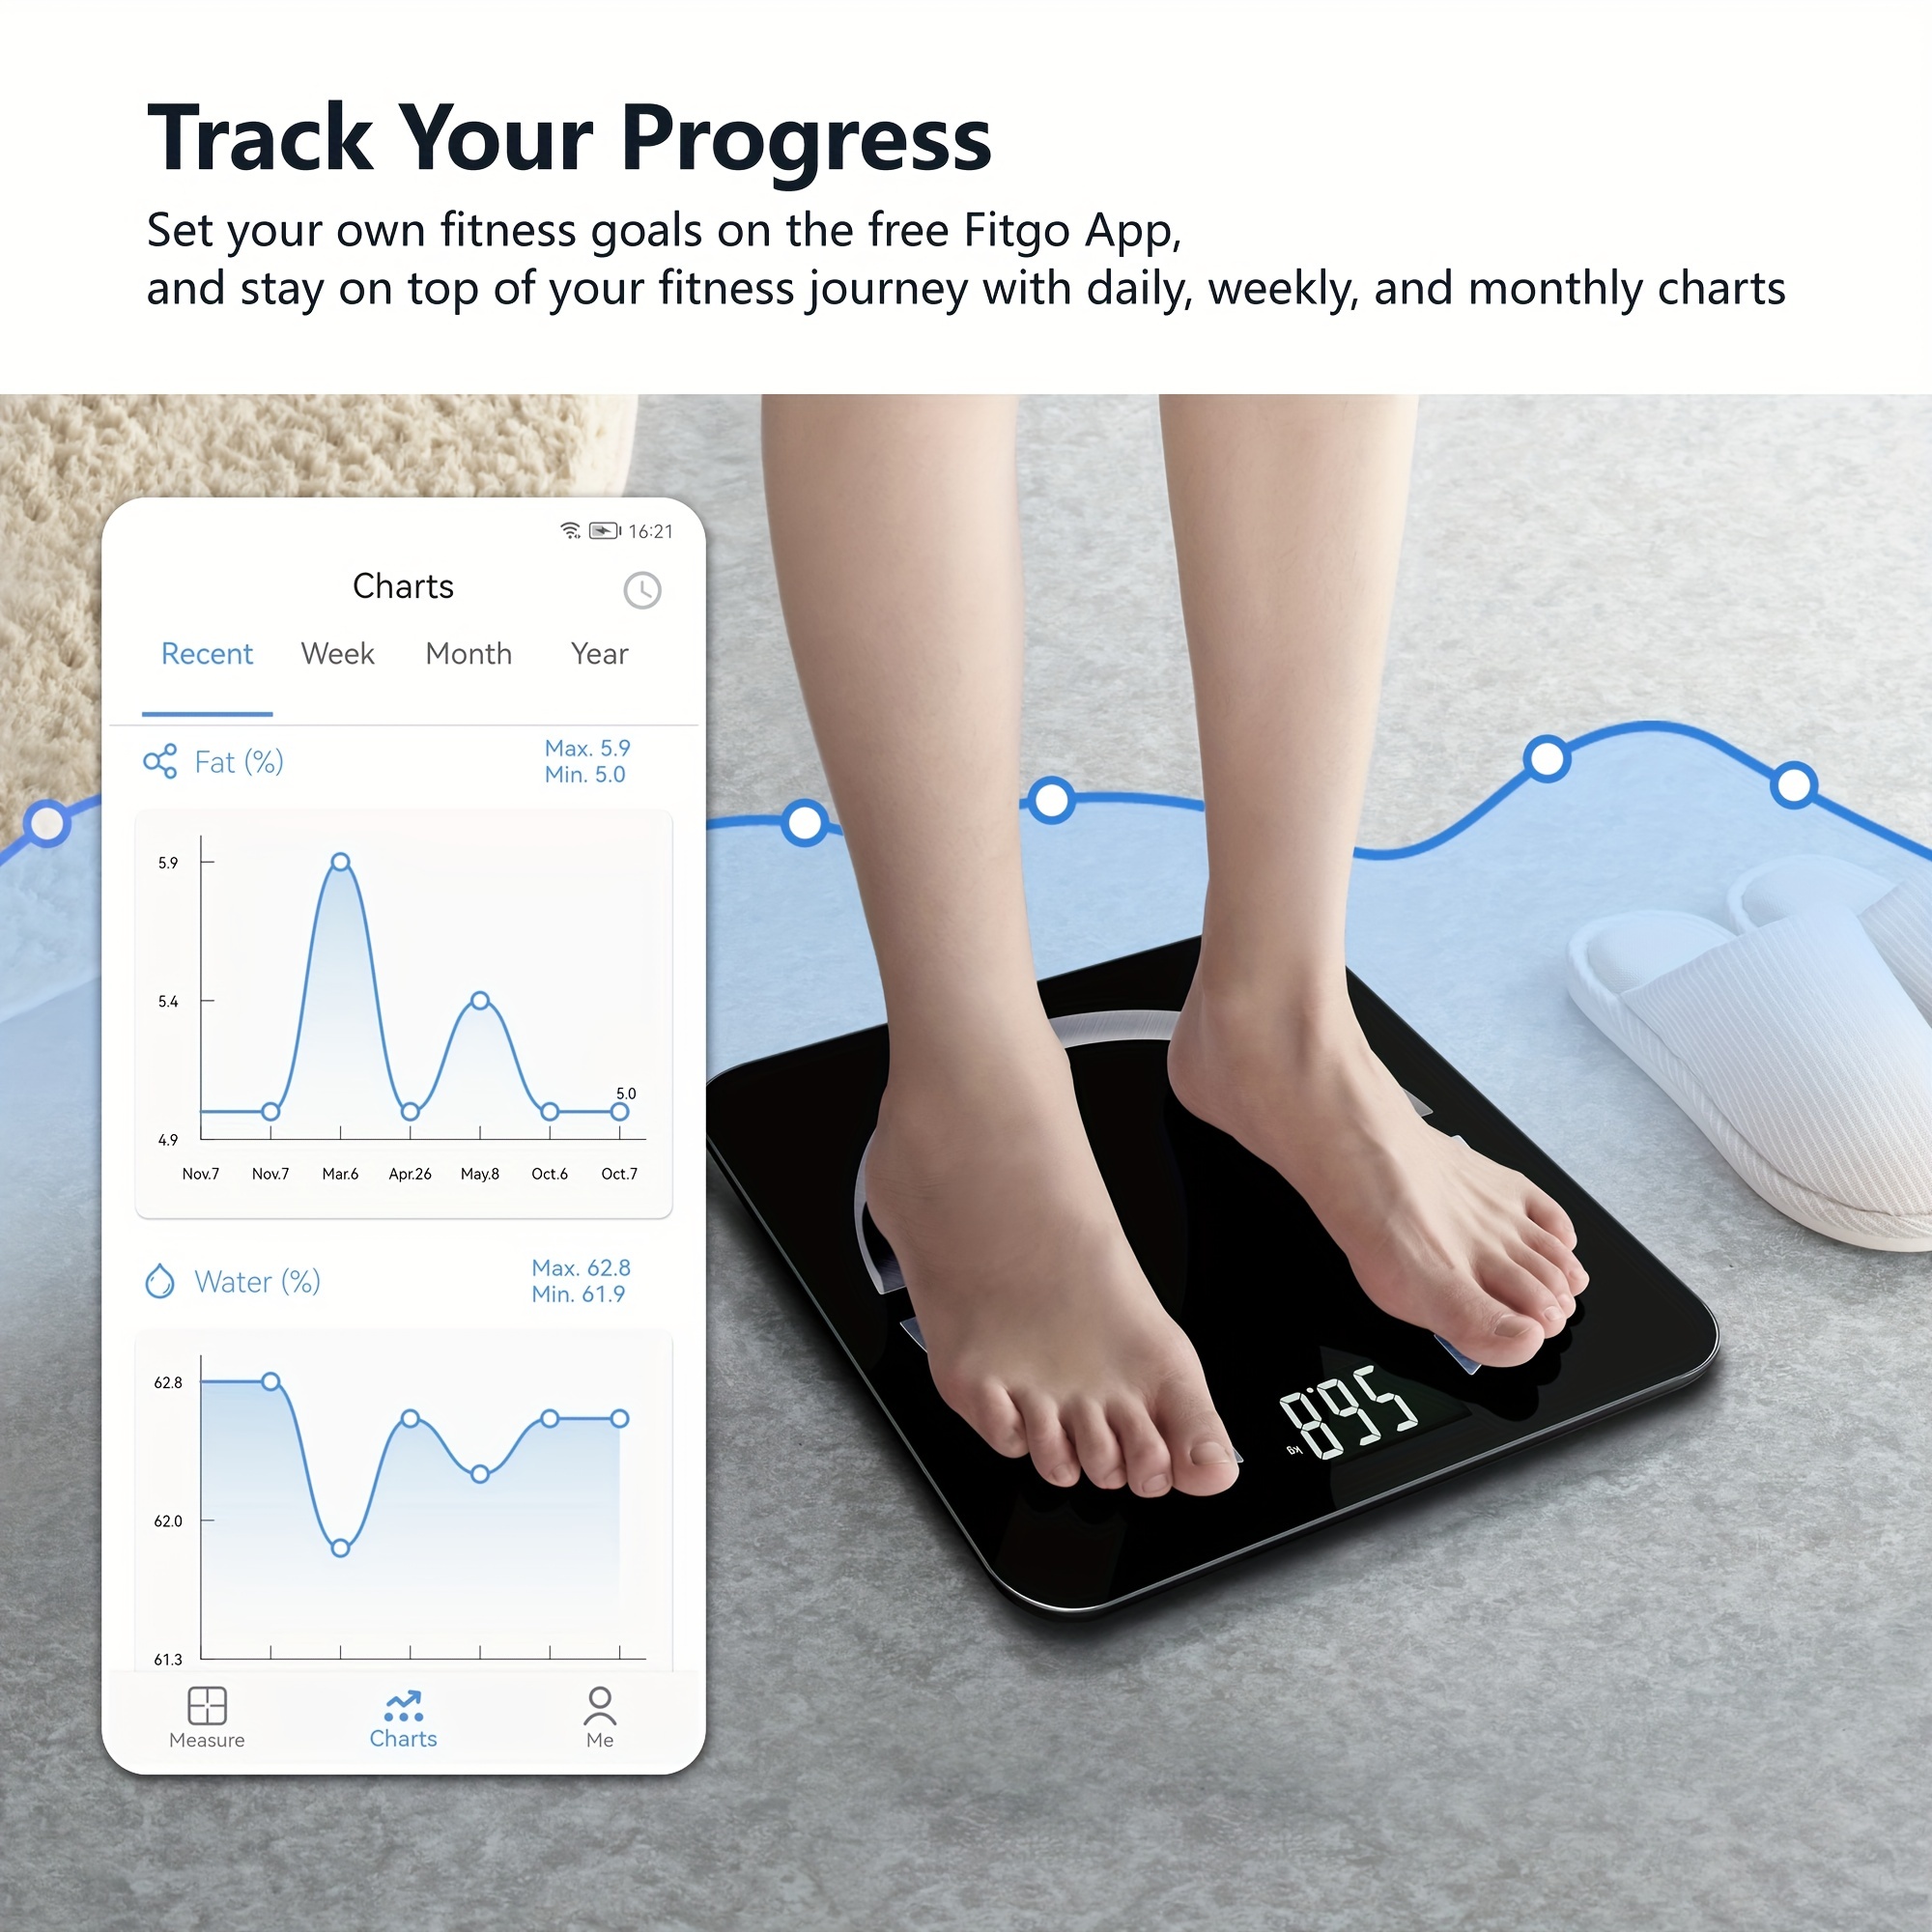 1pc Smart Body Fat Scale with App - Monitors BMI, Body Fat, Visceral Fat,  Water, Muscle & Bone Mass - 396lbs Capacity - Health Measurement Analyzer